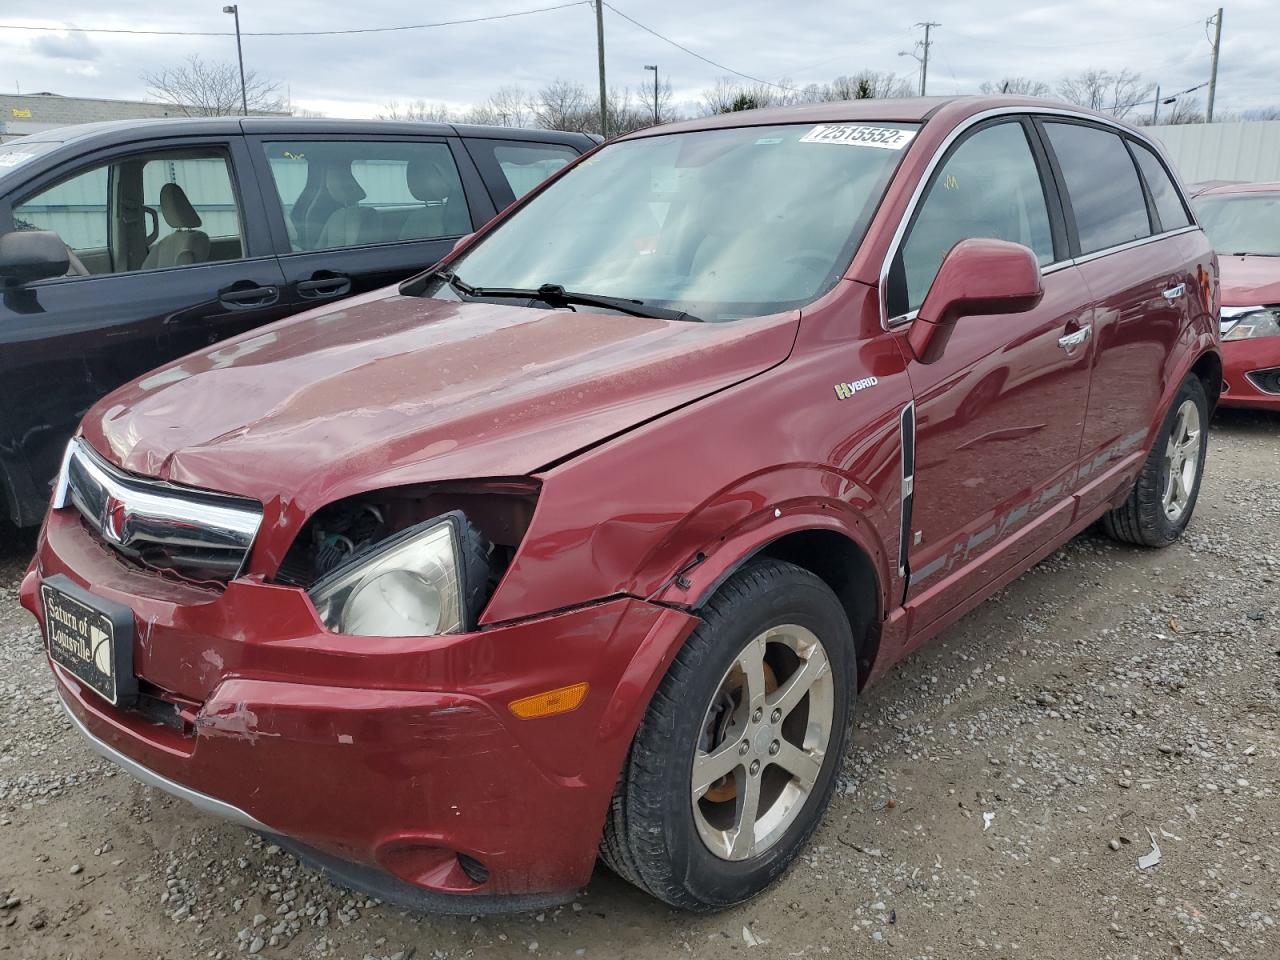 2009 Saturn Vue Hybrid for sale at Copart Louisville, KY Lot #72515*** |  SalvageReseller.com